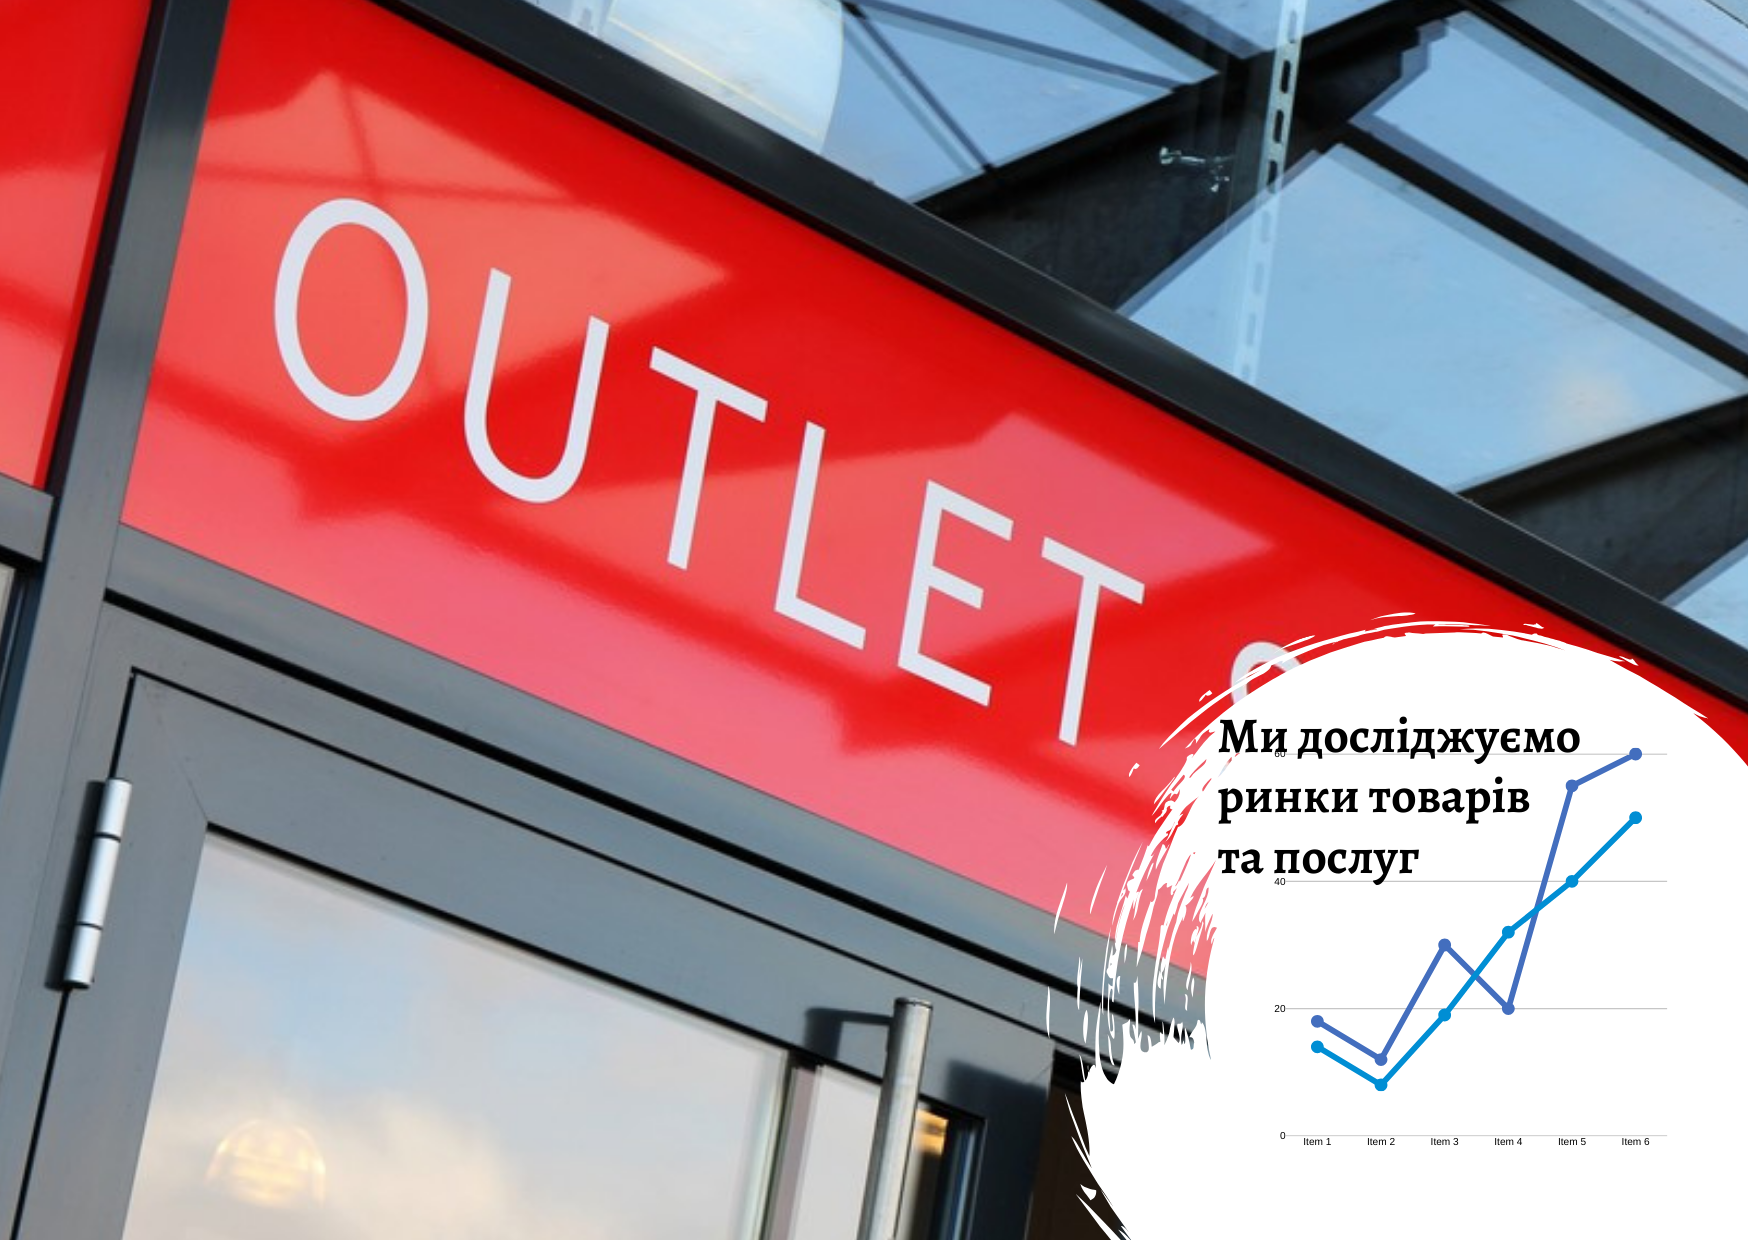 Outlet stores market in Ukraine, Kazakhstan and Poland - research report